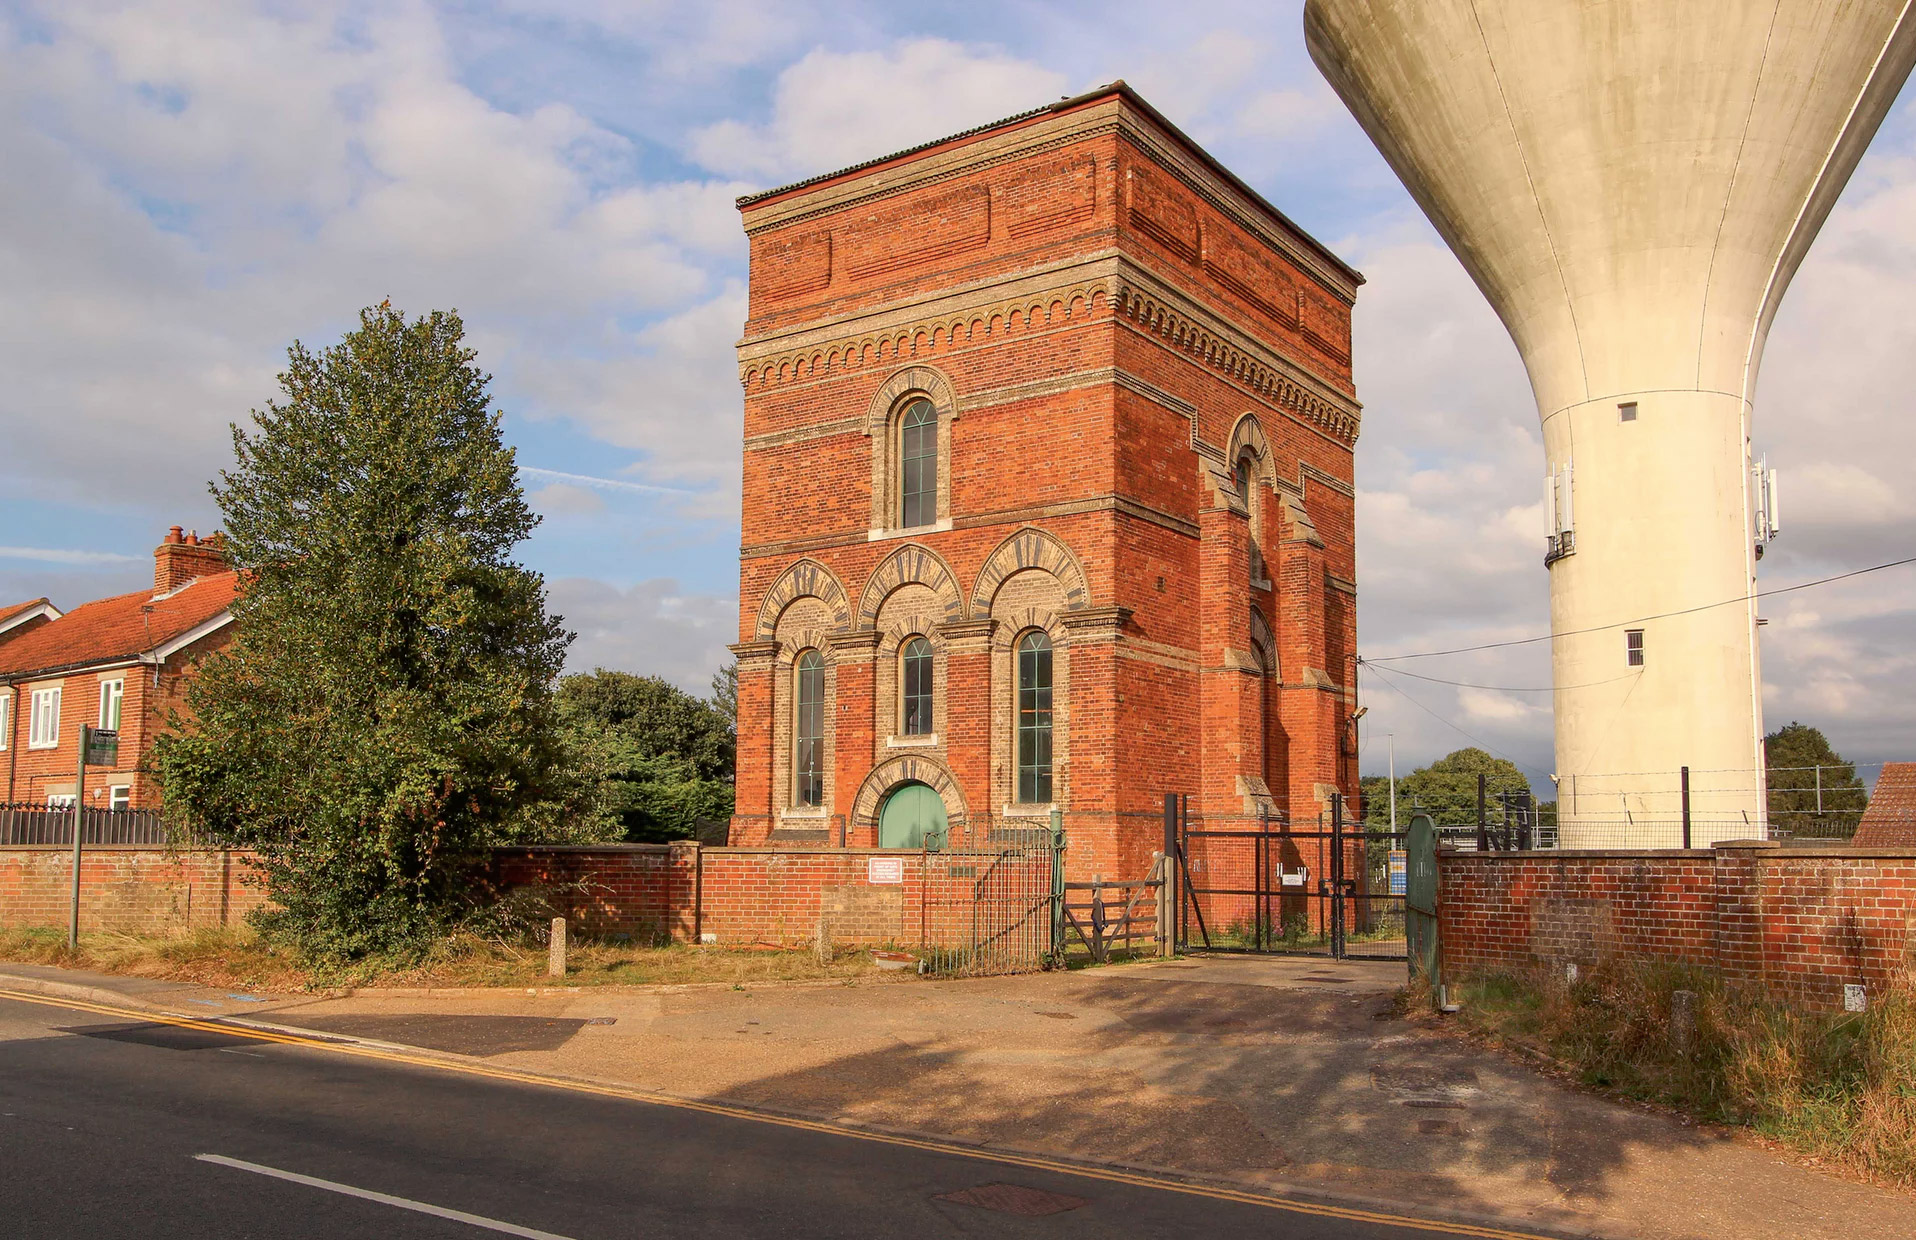 A Victorian water tower lists for £175,000 in Norfolk, UK